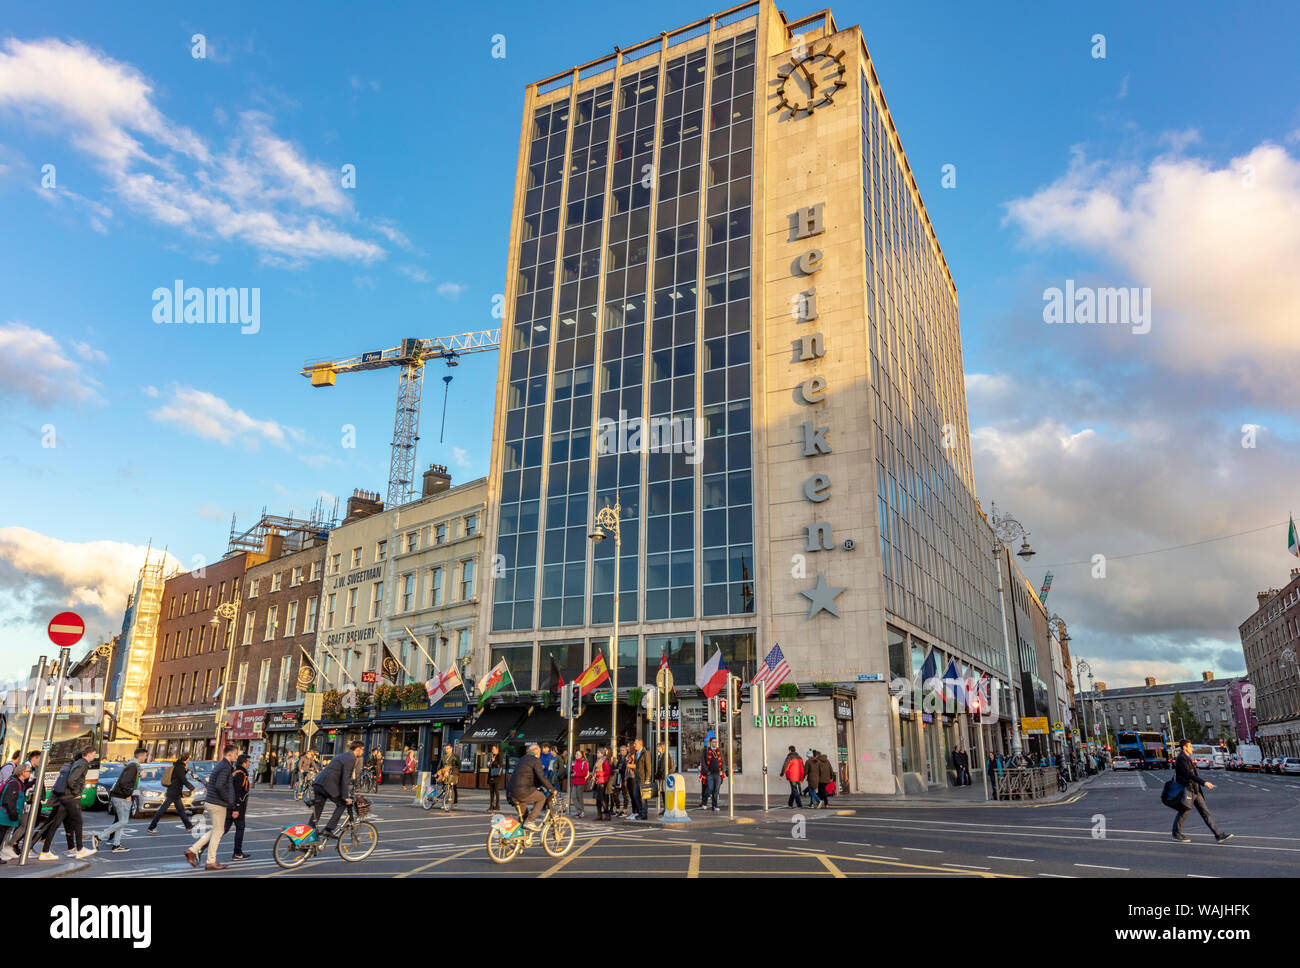 Busy intersection in downtown Dublin, Ireland Stock Photo